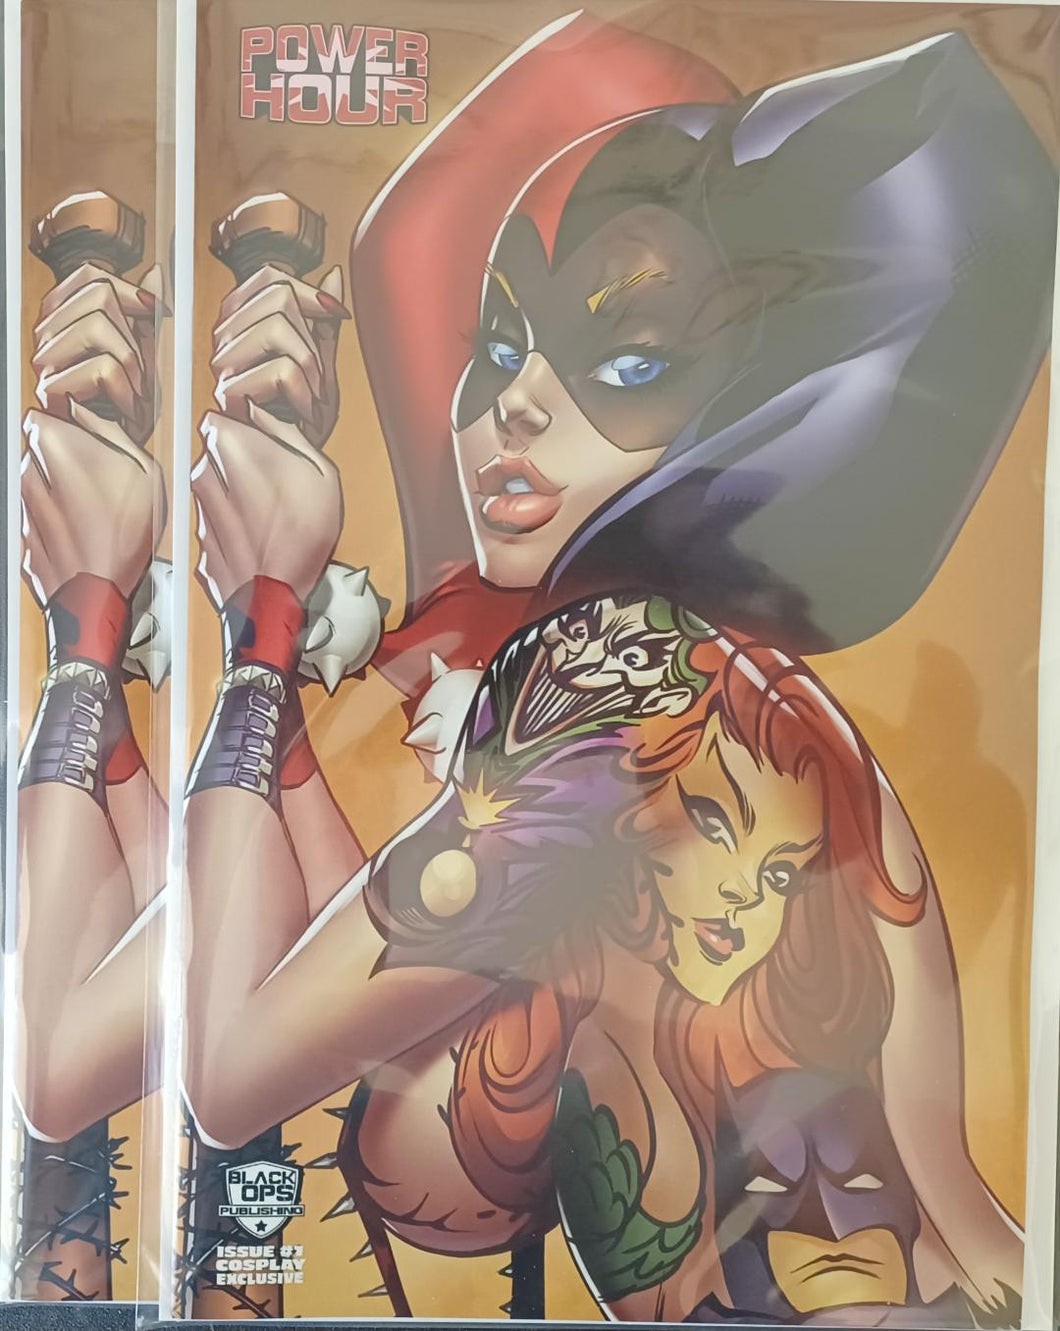 Power Hour Ale Garza Harley Quinn Close Up Cosplay Set of 2 Covers !!!  NM